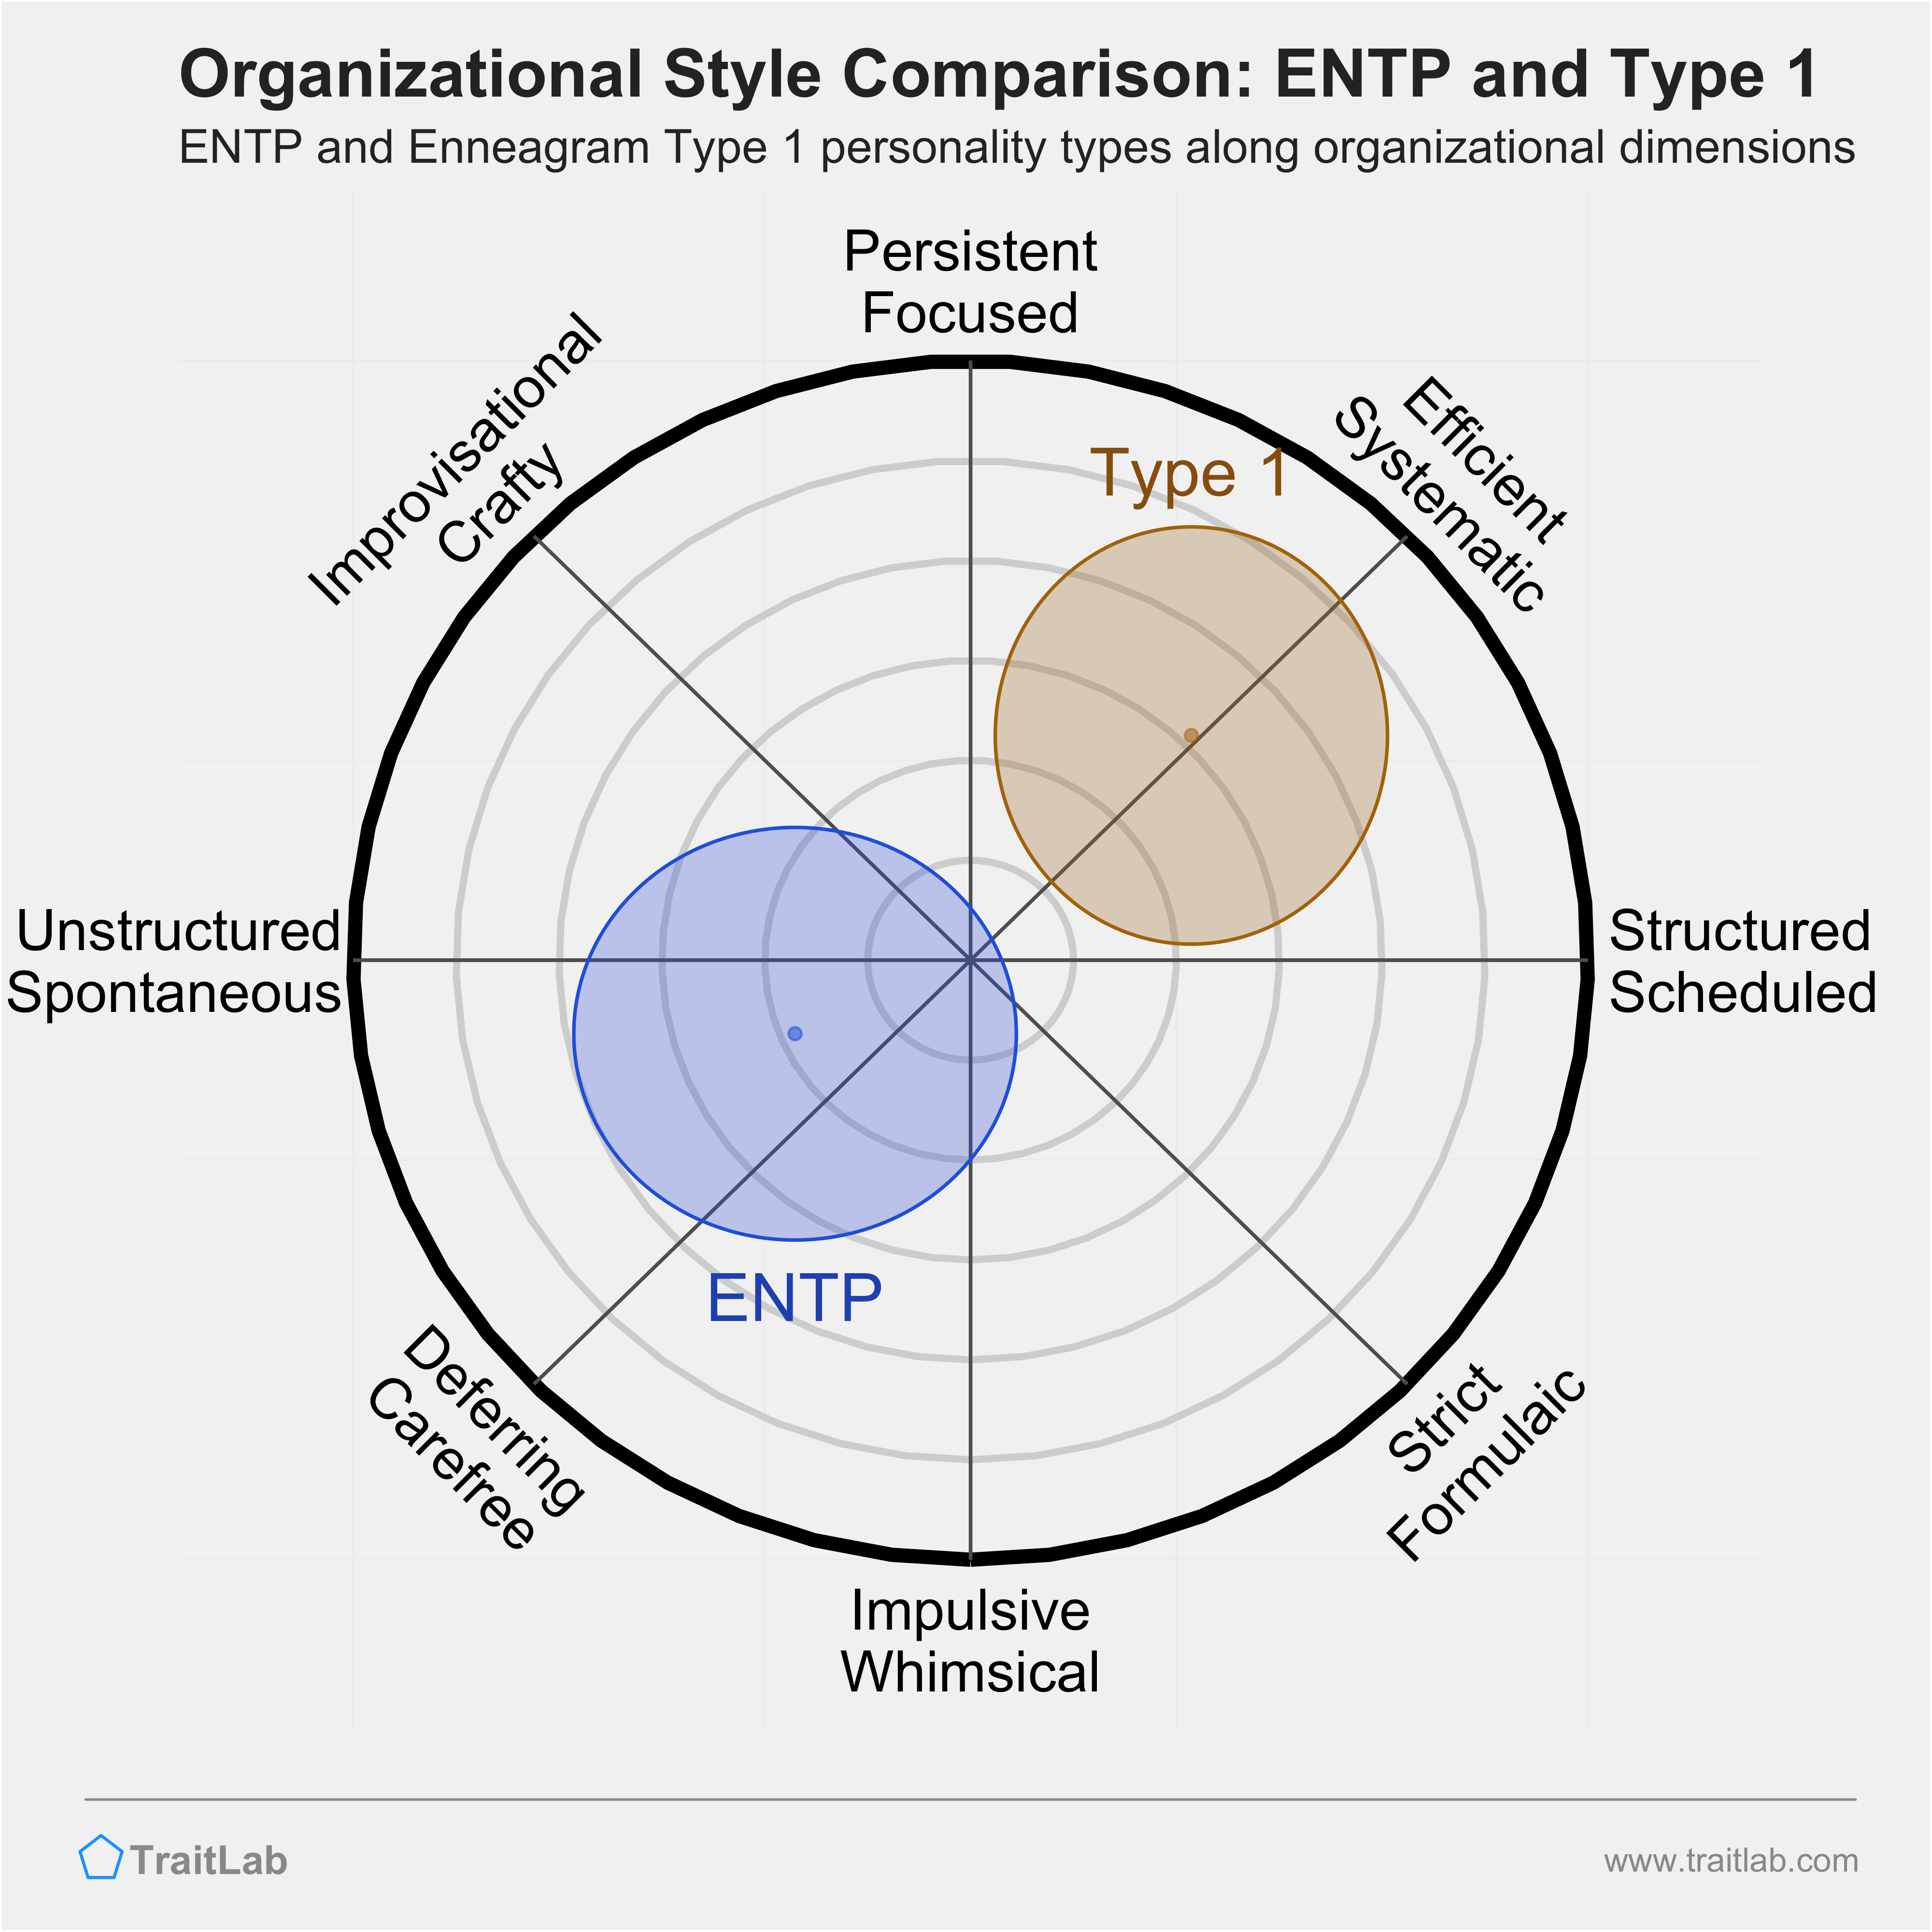 ENTP and Type 1 comparison across organizational dimensions